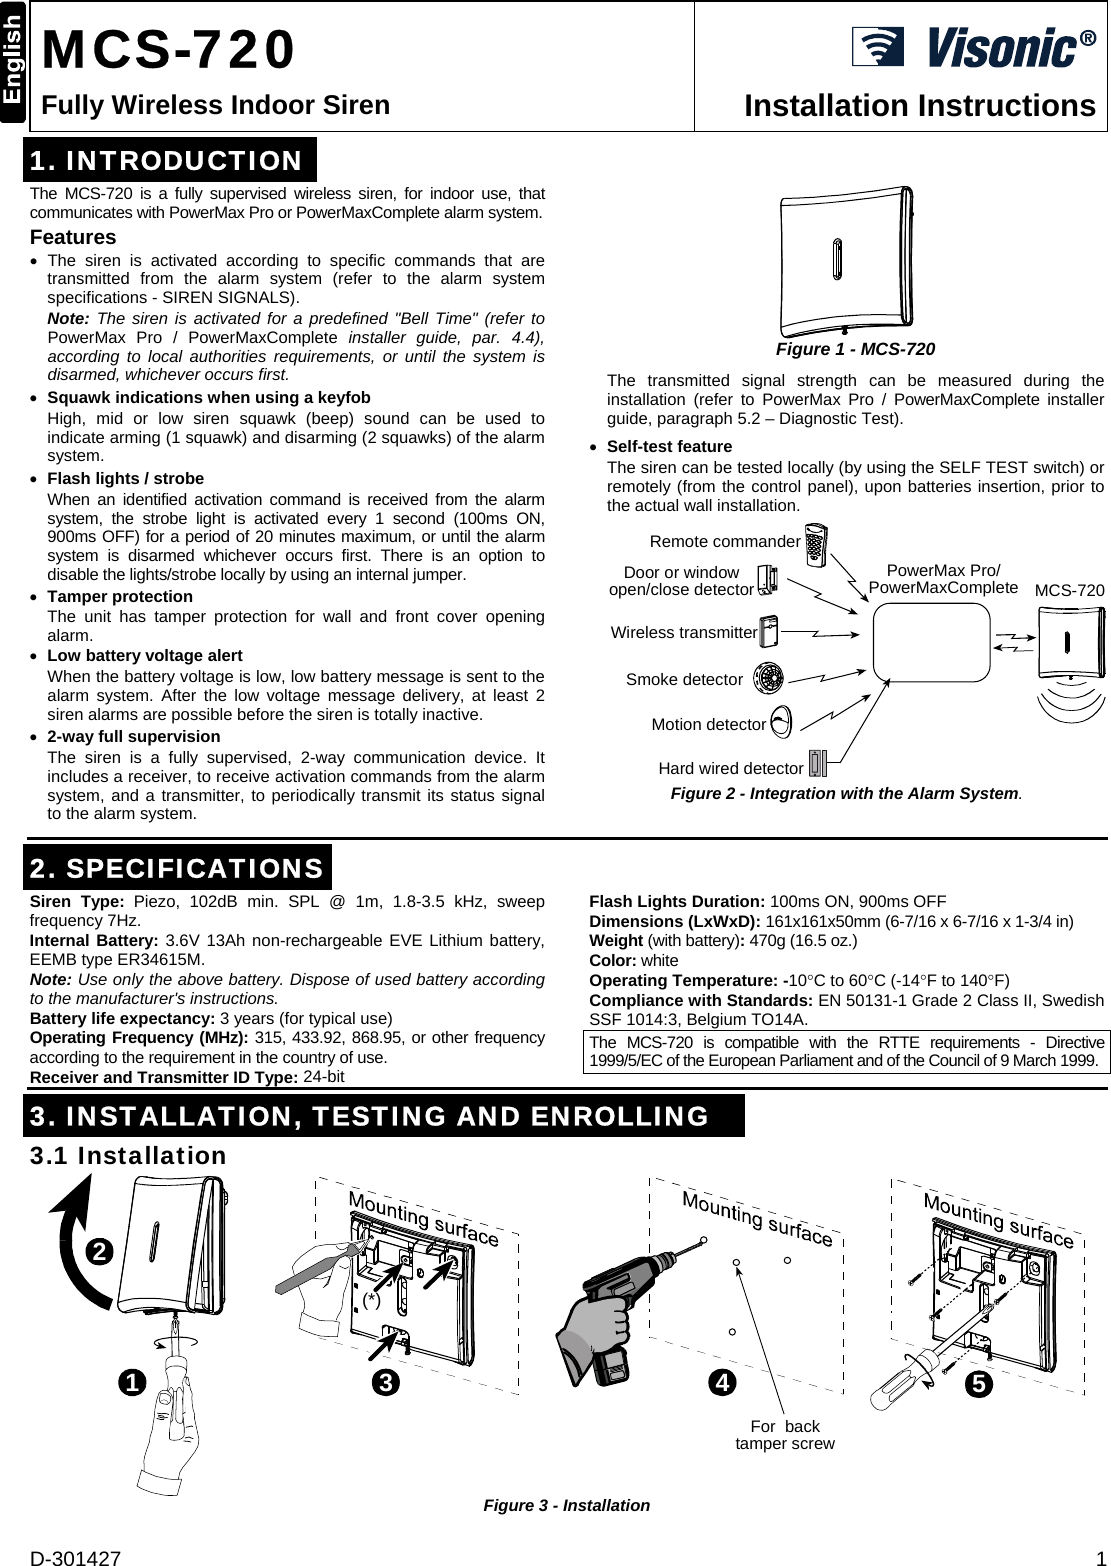 D-301427  1  MCS-720 Fully Wireless Indoor Siren  Installation Instructions 1. INTRODUCTION The MCS-720 is a fully supervised wireless siren, for indoor use, that communicates with PowerMax Pro or PowerMaxComplete alarm system.  Features • The siren is activated according to specific commands that are transmitted from the alarm system (refer to the alarm system specifications - SIREN SIGNALS). Note: The siren is activated for a predefined &quot;Bell Time&quot; (refer to PowerMax Pro / PowerMaxComplete installer guide, par. 4.4), according to local authorities requirements, or until the system is disarmed, whichever occurs first. • Squawk indications when using a keyfob High, mid or low siren squawk (beep) sound can be used to indicate arming (1 squawk) and disarming (2 squawks) of the alarm system. • Flash lights / strobe When an identified activation command is received from the alarm system, the strobe light is activated every 1 second (100ms ON, 900ms OFF) for a period of 20 minutes maximum, or until the alarm system is disarmed whichever occurs first. There is an option to disable the lights/strobe locally by using an internal jumper. • Tamper protection The unit has tamper protection for wall and front cover opening alarm. • Low battery voltage alert When the battery voltage is low, low battery message is sent to the alarm system. After the low voltage message delivery, at least 2 siren alarms are possible before the siren is totally inactive. • 2-way full supervision The siren is a fully supervised, 2-way communication device. It includes a receiver, to receive activation commands from the alarm system, and a transmitter, to periodically transmit its status signal to the alarm system.  Figure 1 - MCS-720 The transmitted signal strength can be measured during the installation (refer to PowerMax Pro / PowerMaxComplete installer guide, paragraph 5.2 – Diagnostic Test). • Self-test feature The siren can be tested locally (by using the SELF TEST switch) or remotely (from the control panel), upon batteries insertion, prior to the actual wall installation.  MCS-720Hard wired detectorSmoke detectorWireless transmitterDoor or windowopen/close detectorMotion detectorRemote commanderPowerMax Pro/PowerMaxComplete Figure 2 - Integration with the Alarm System.     2. SPECIFICATIONS Siren Type: Piezo, 102dB min. SPL @ 1m, 1.8-3.5 kHz, sweep frequency 7Hz.          Internal Battery: 3.6V 13Ah non-rechargeable EVE Lithium battery, EEMB type ER34615M. Note: Use only the above battery. Dispose of used battery according to the manufacturer&apos;s instructions. Battery life expectancy: 3 years (for typical use) Operating Frequency (MHz): 315, 433.92, 868.95, or other frequency according to the requirement in the country of use.  Receiver and Transmitter ID Type: 24-bit Flash Lights Duration: 100ms ON, 900ms OFF  Dimensions (LxWxD): 161x161x50mm (6-7/16 x 6-7/16 x 1-3/4 in)  Weight (with battery): 470g (16.5 oz.) Color: white Operating Temperature: -10°C to 60°C (-14°F to 140°F)  Compliance with Standards: EN 50131-1 Grade 2 Class II, Swedish SSF 1014:3, Belgium TO14A. The MCS-720 is compatible with the RTTE requirements - Directive 1999/5/EC of the European Parliament and of the Council of 9 March 1999.  3. INSTALLATION, TESTING AND ENROLLING 3.1 Installation 123(*)4For  backtamper screw5 Figure 3 - Installation 